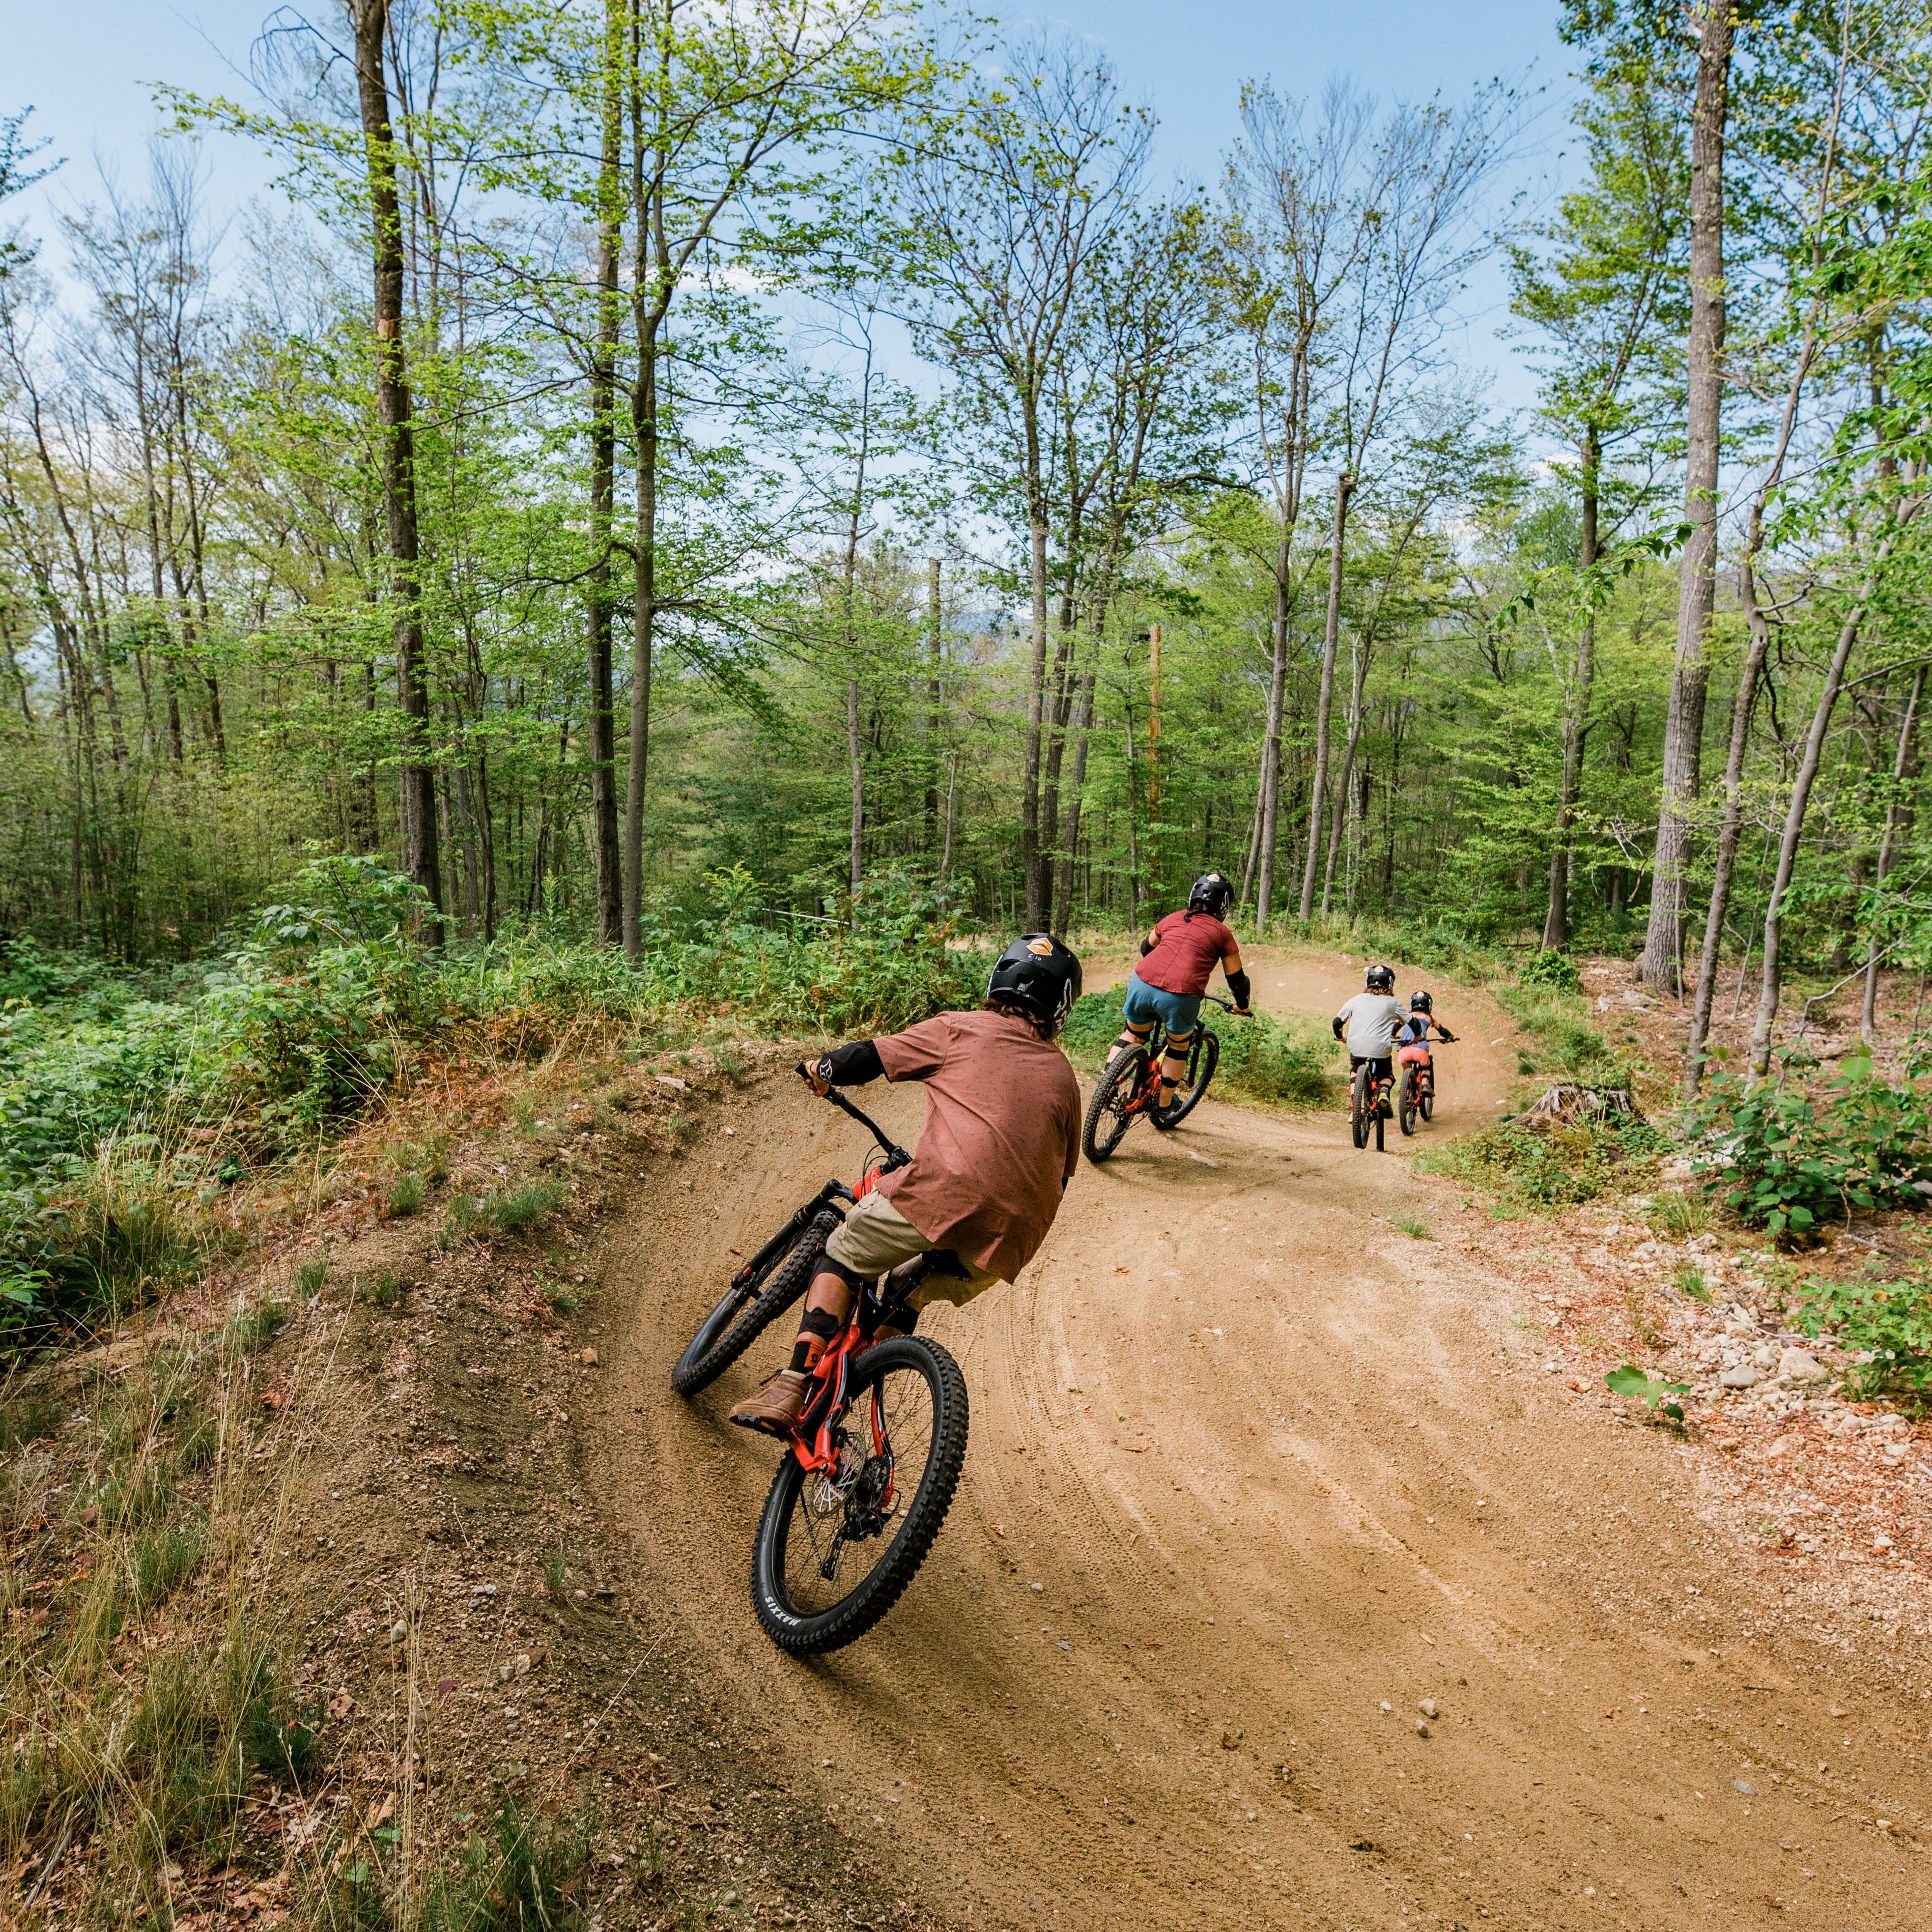 Bike Park Family from behind going around curve on flow trail